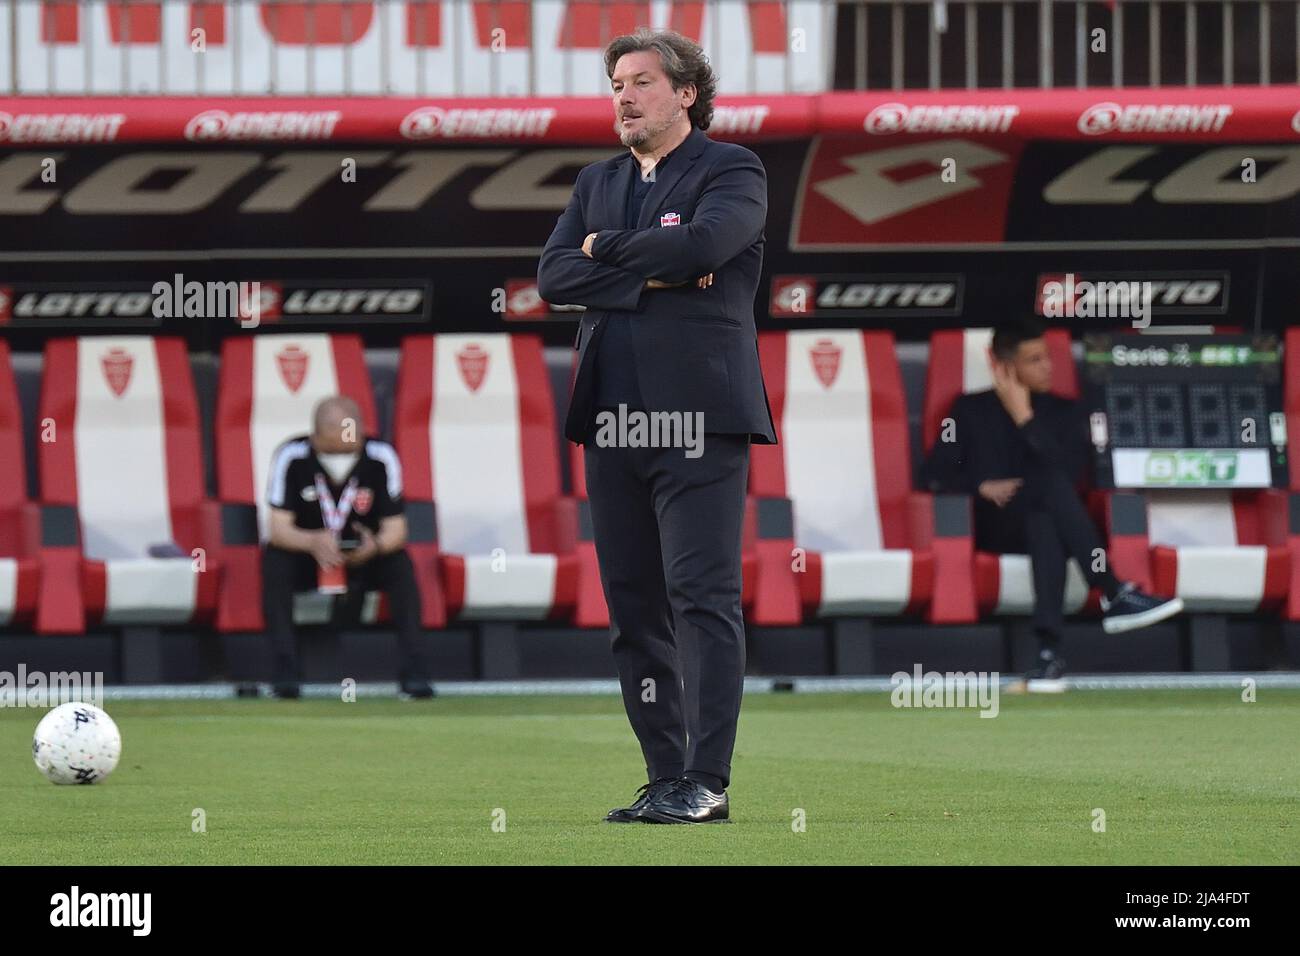 Monza, Italy. 26th May, 2022. Head coach of Monza Giovanni Stroppa during warmup during Play Off - AC Monza vs AC Pisa, Italian soccer Serie B match in Monza, Italy, May 26 2022 Credit: Independent Photo Agency/Alamy Live News Stock Photo